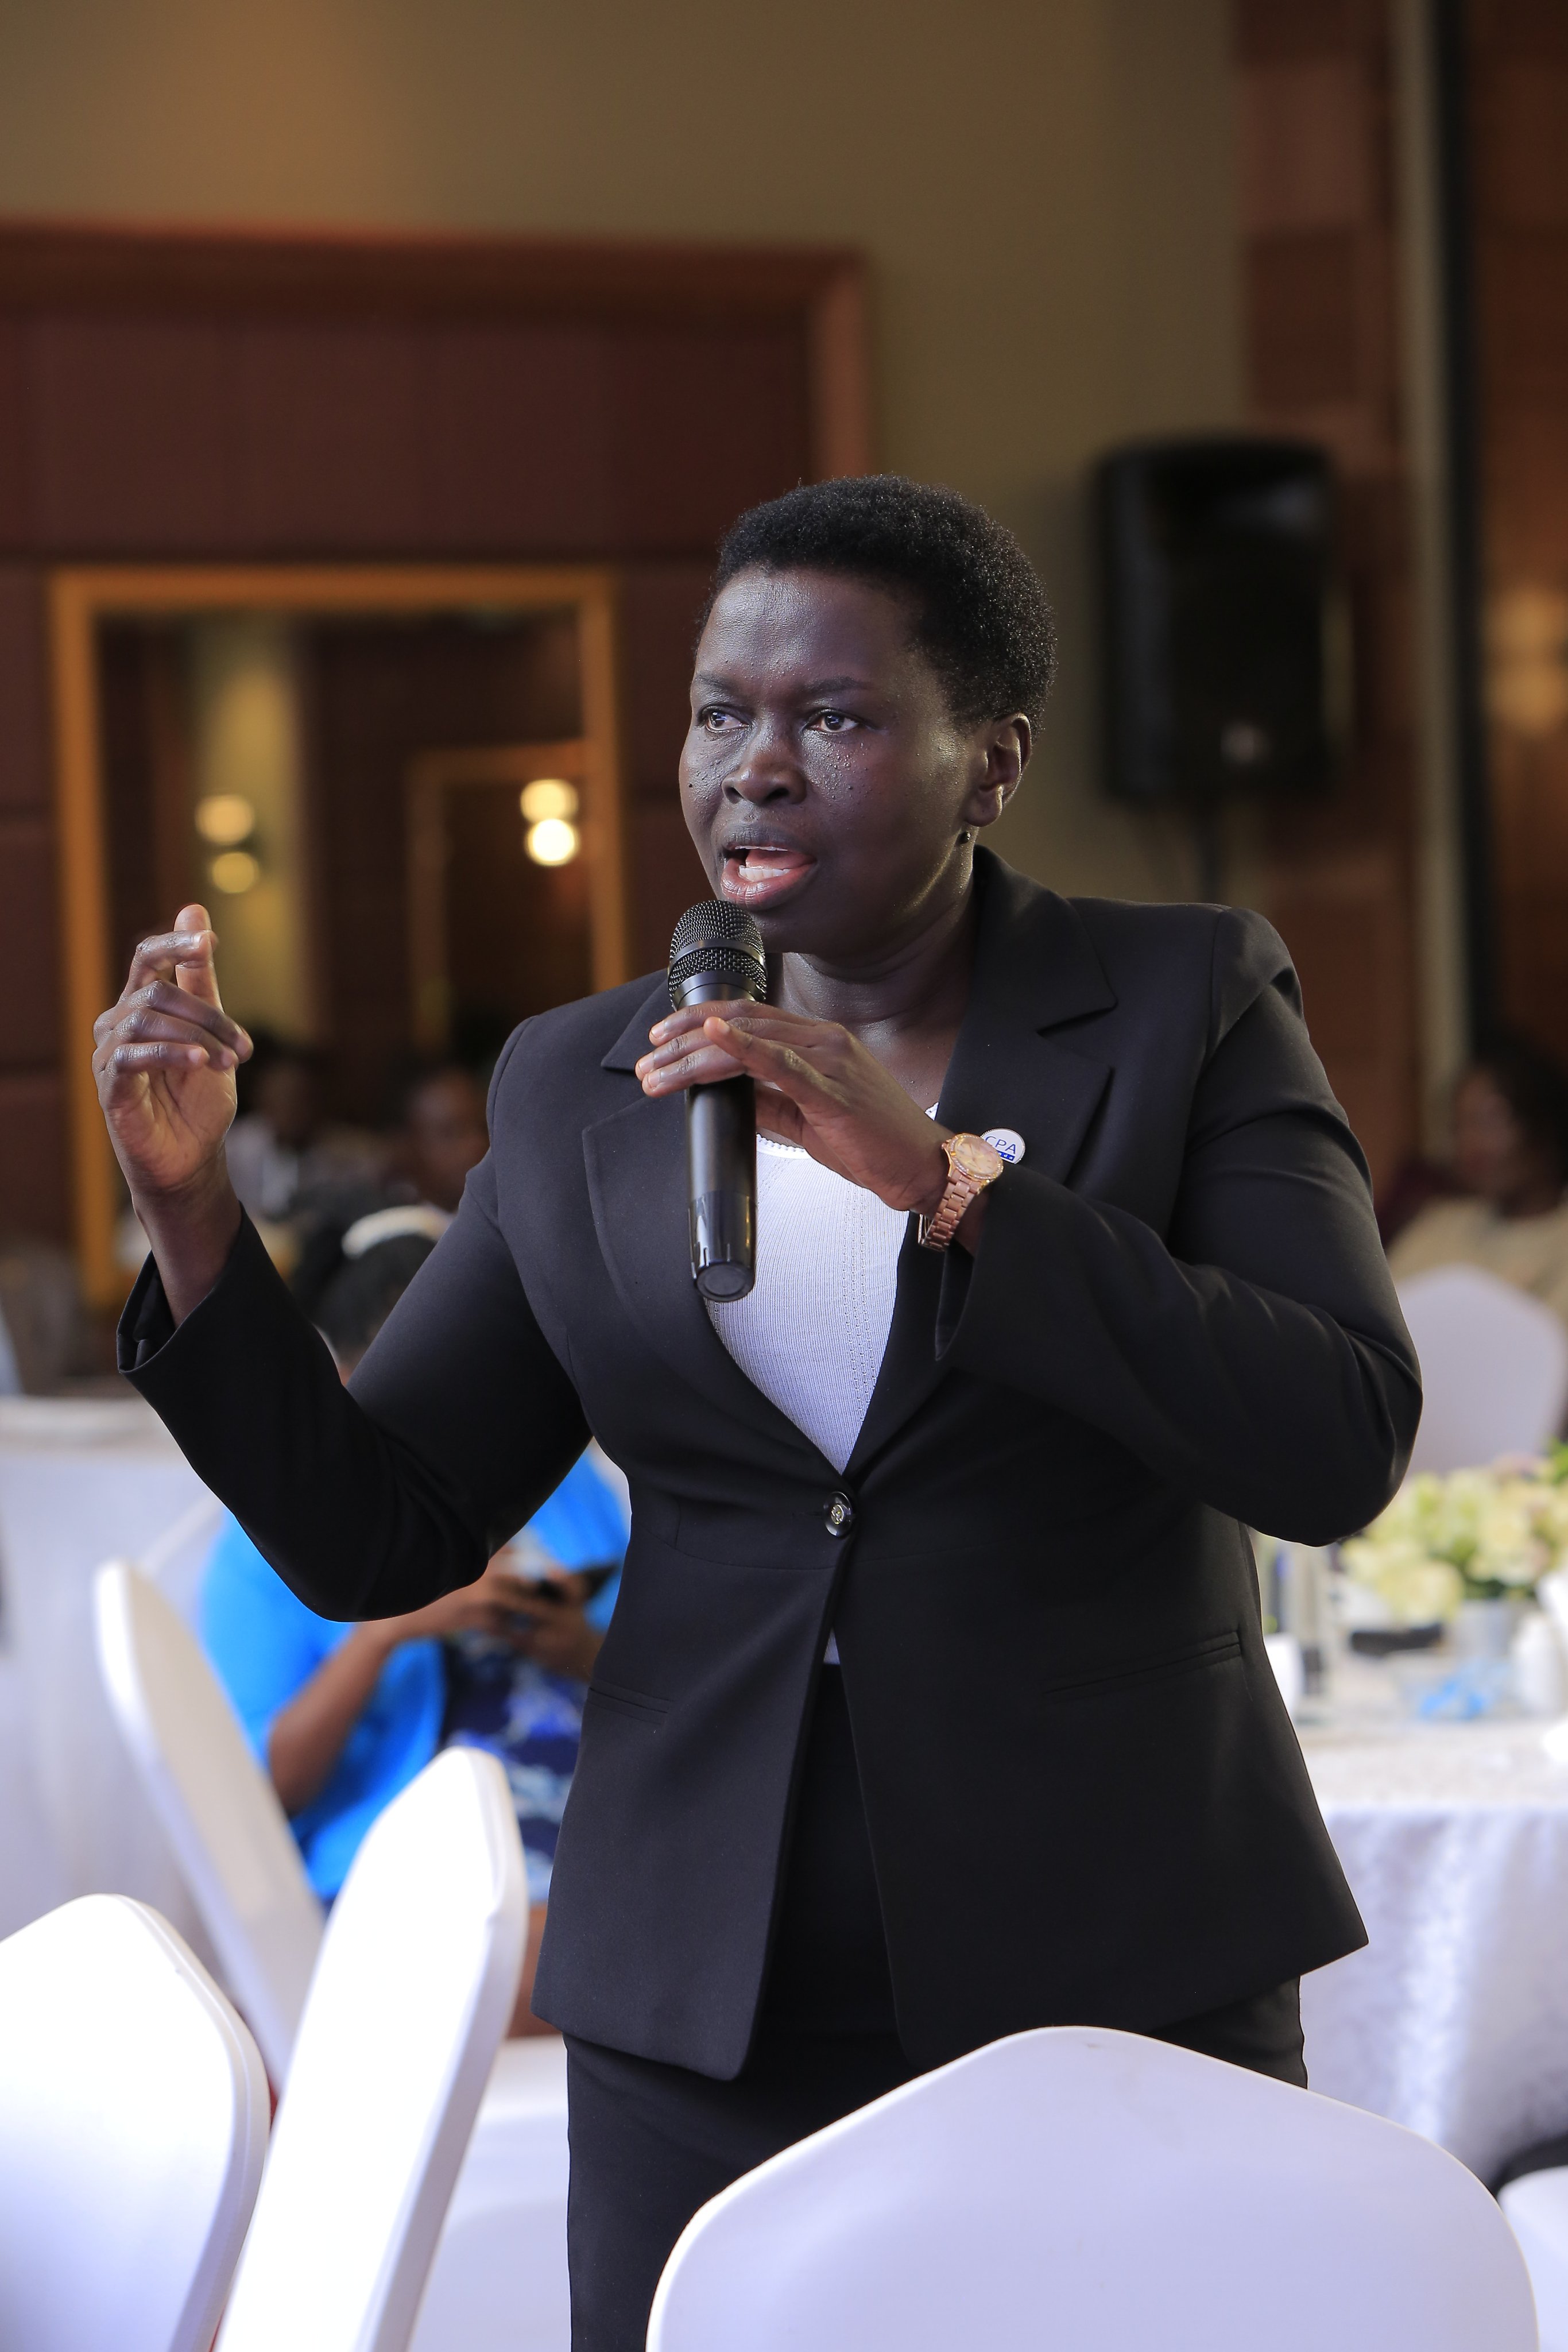 CPA Sarah Chelangat, Commissioner Domestic Tax, URA giving her remarks during the Q&A session at the 2nd C-Suite Forum at the Kampala Sheraton Hotel.